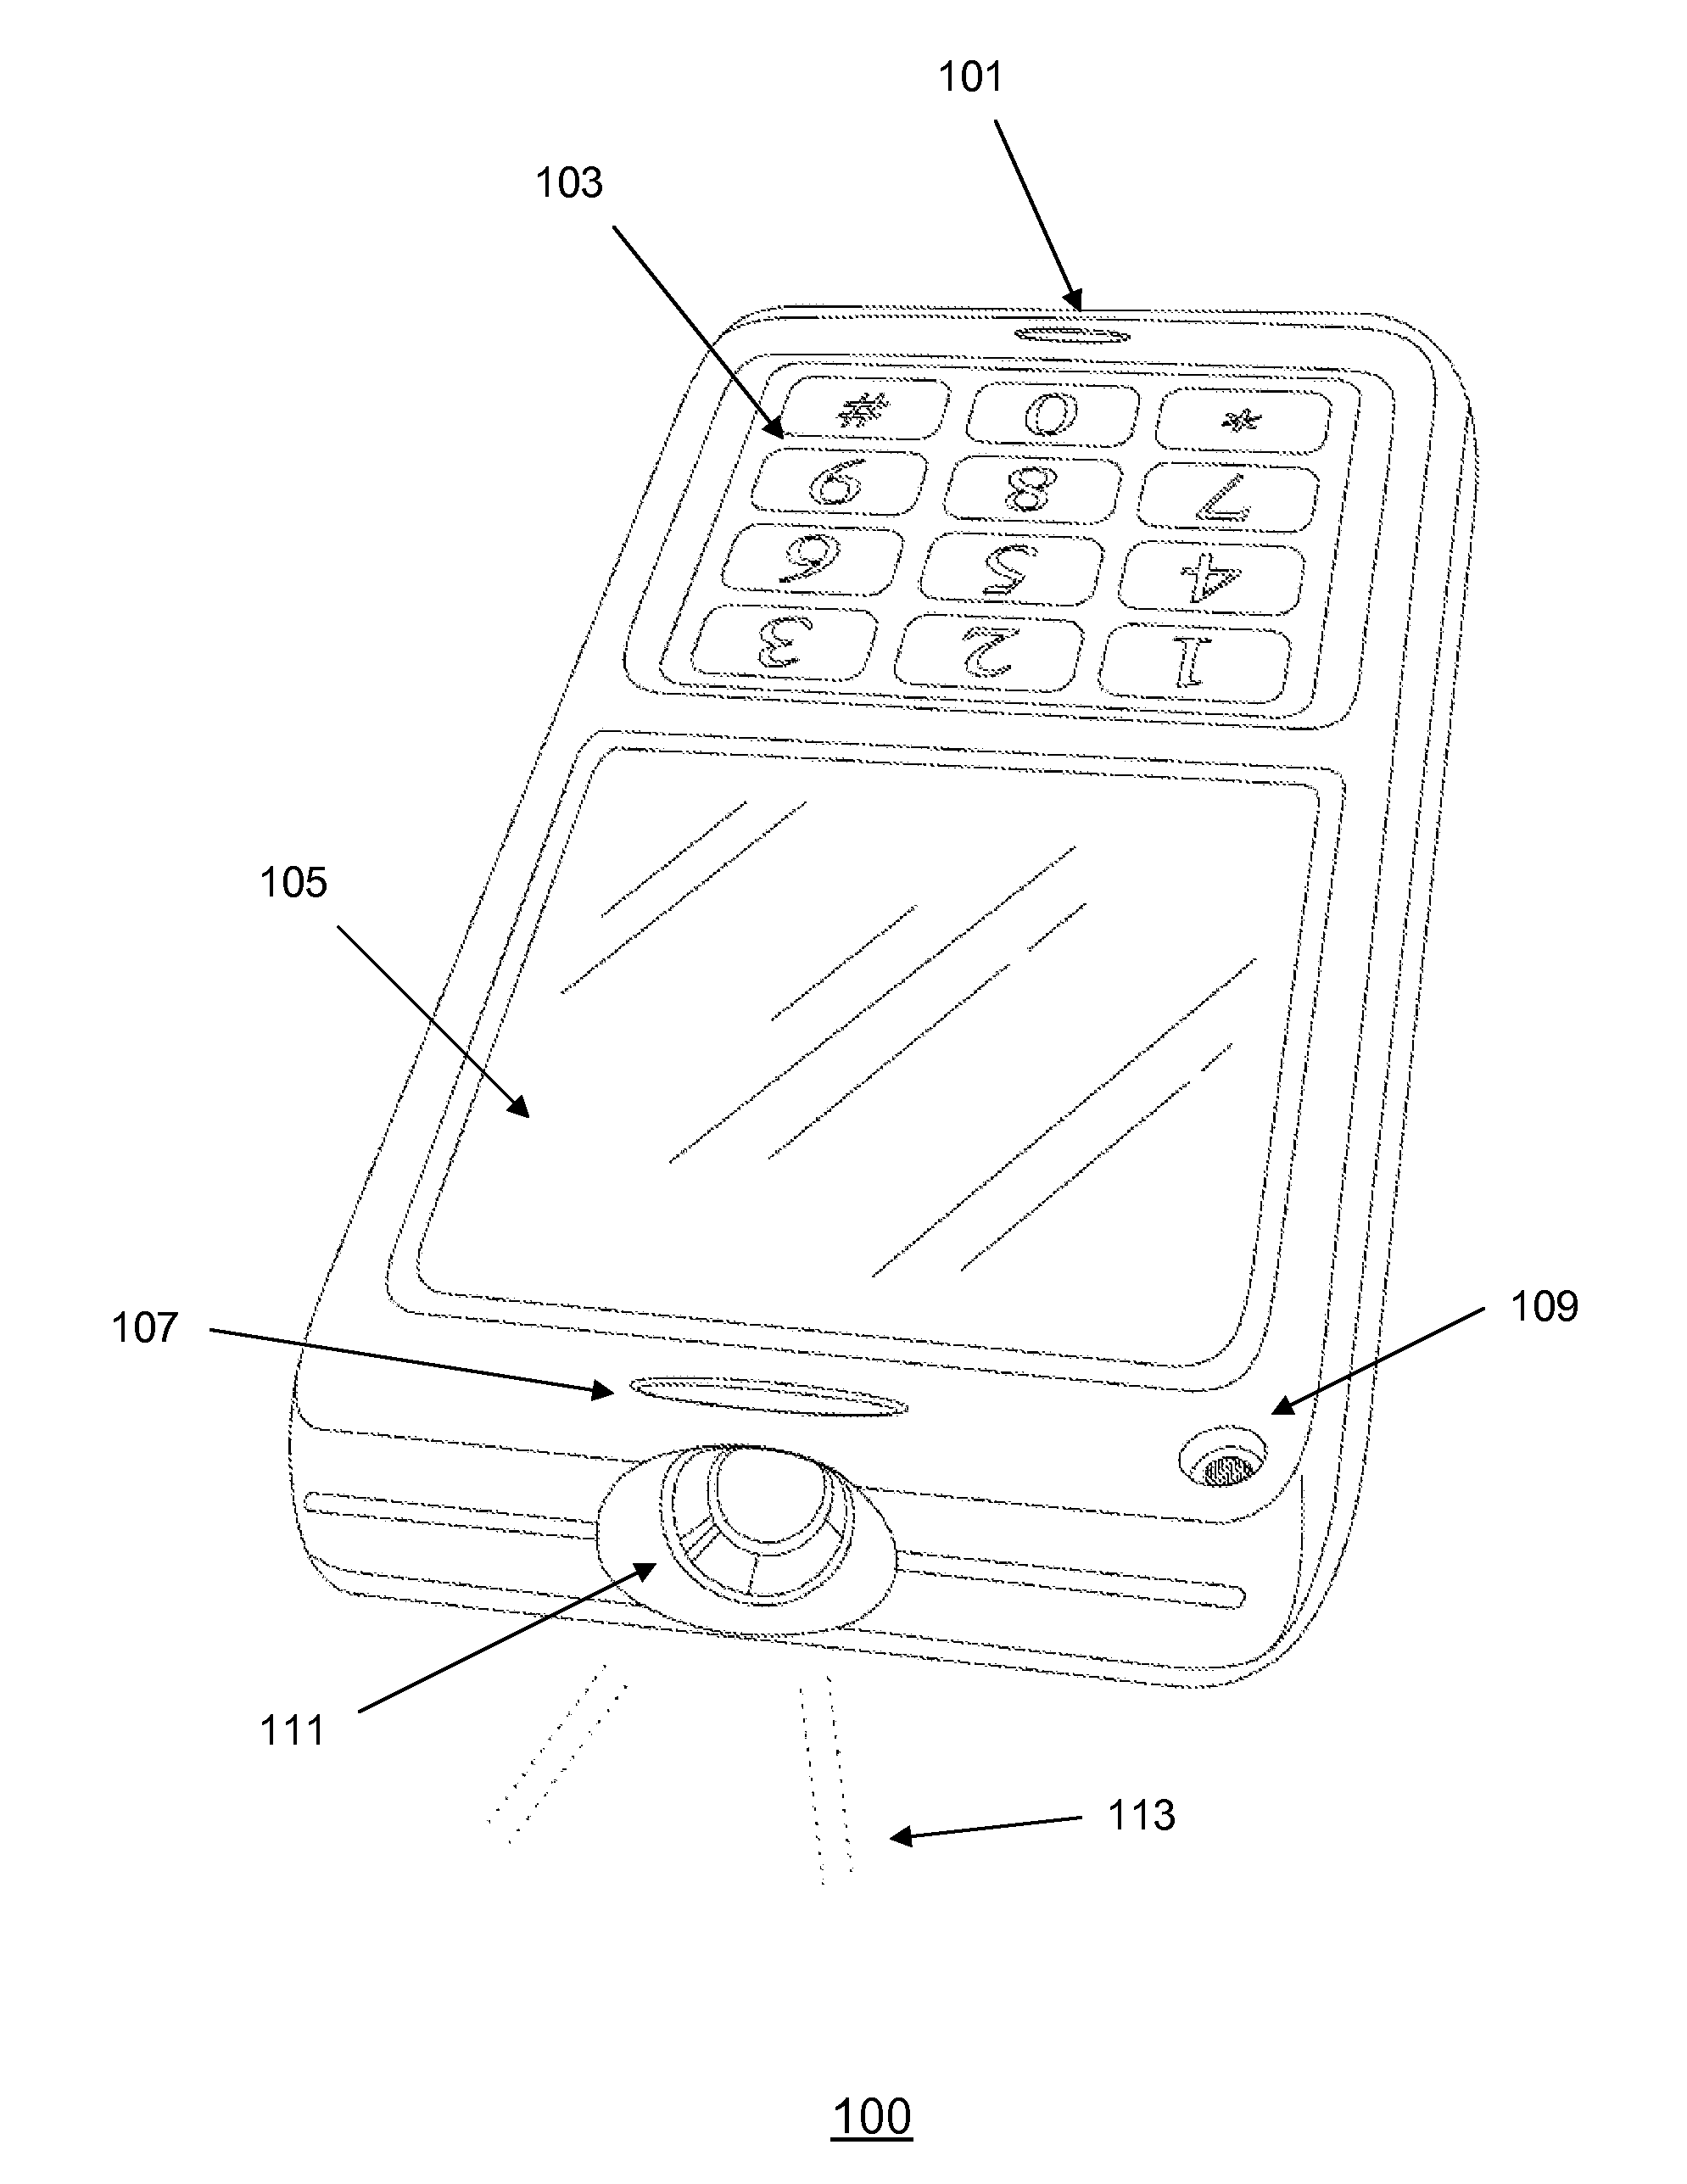 Apparatus and method for using a dedicated game interface on a wireless communication device with projector capability